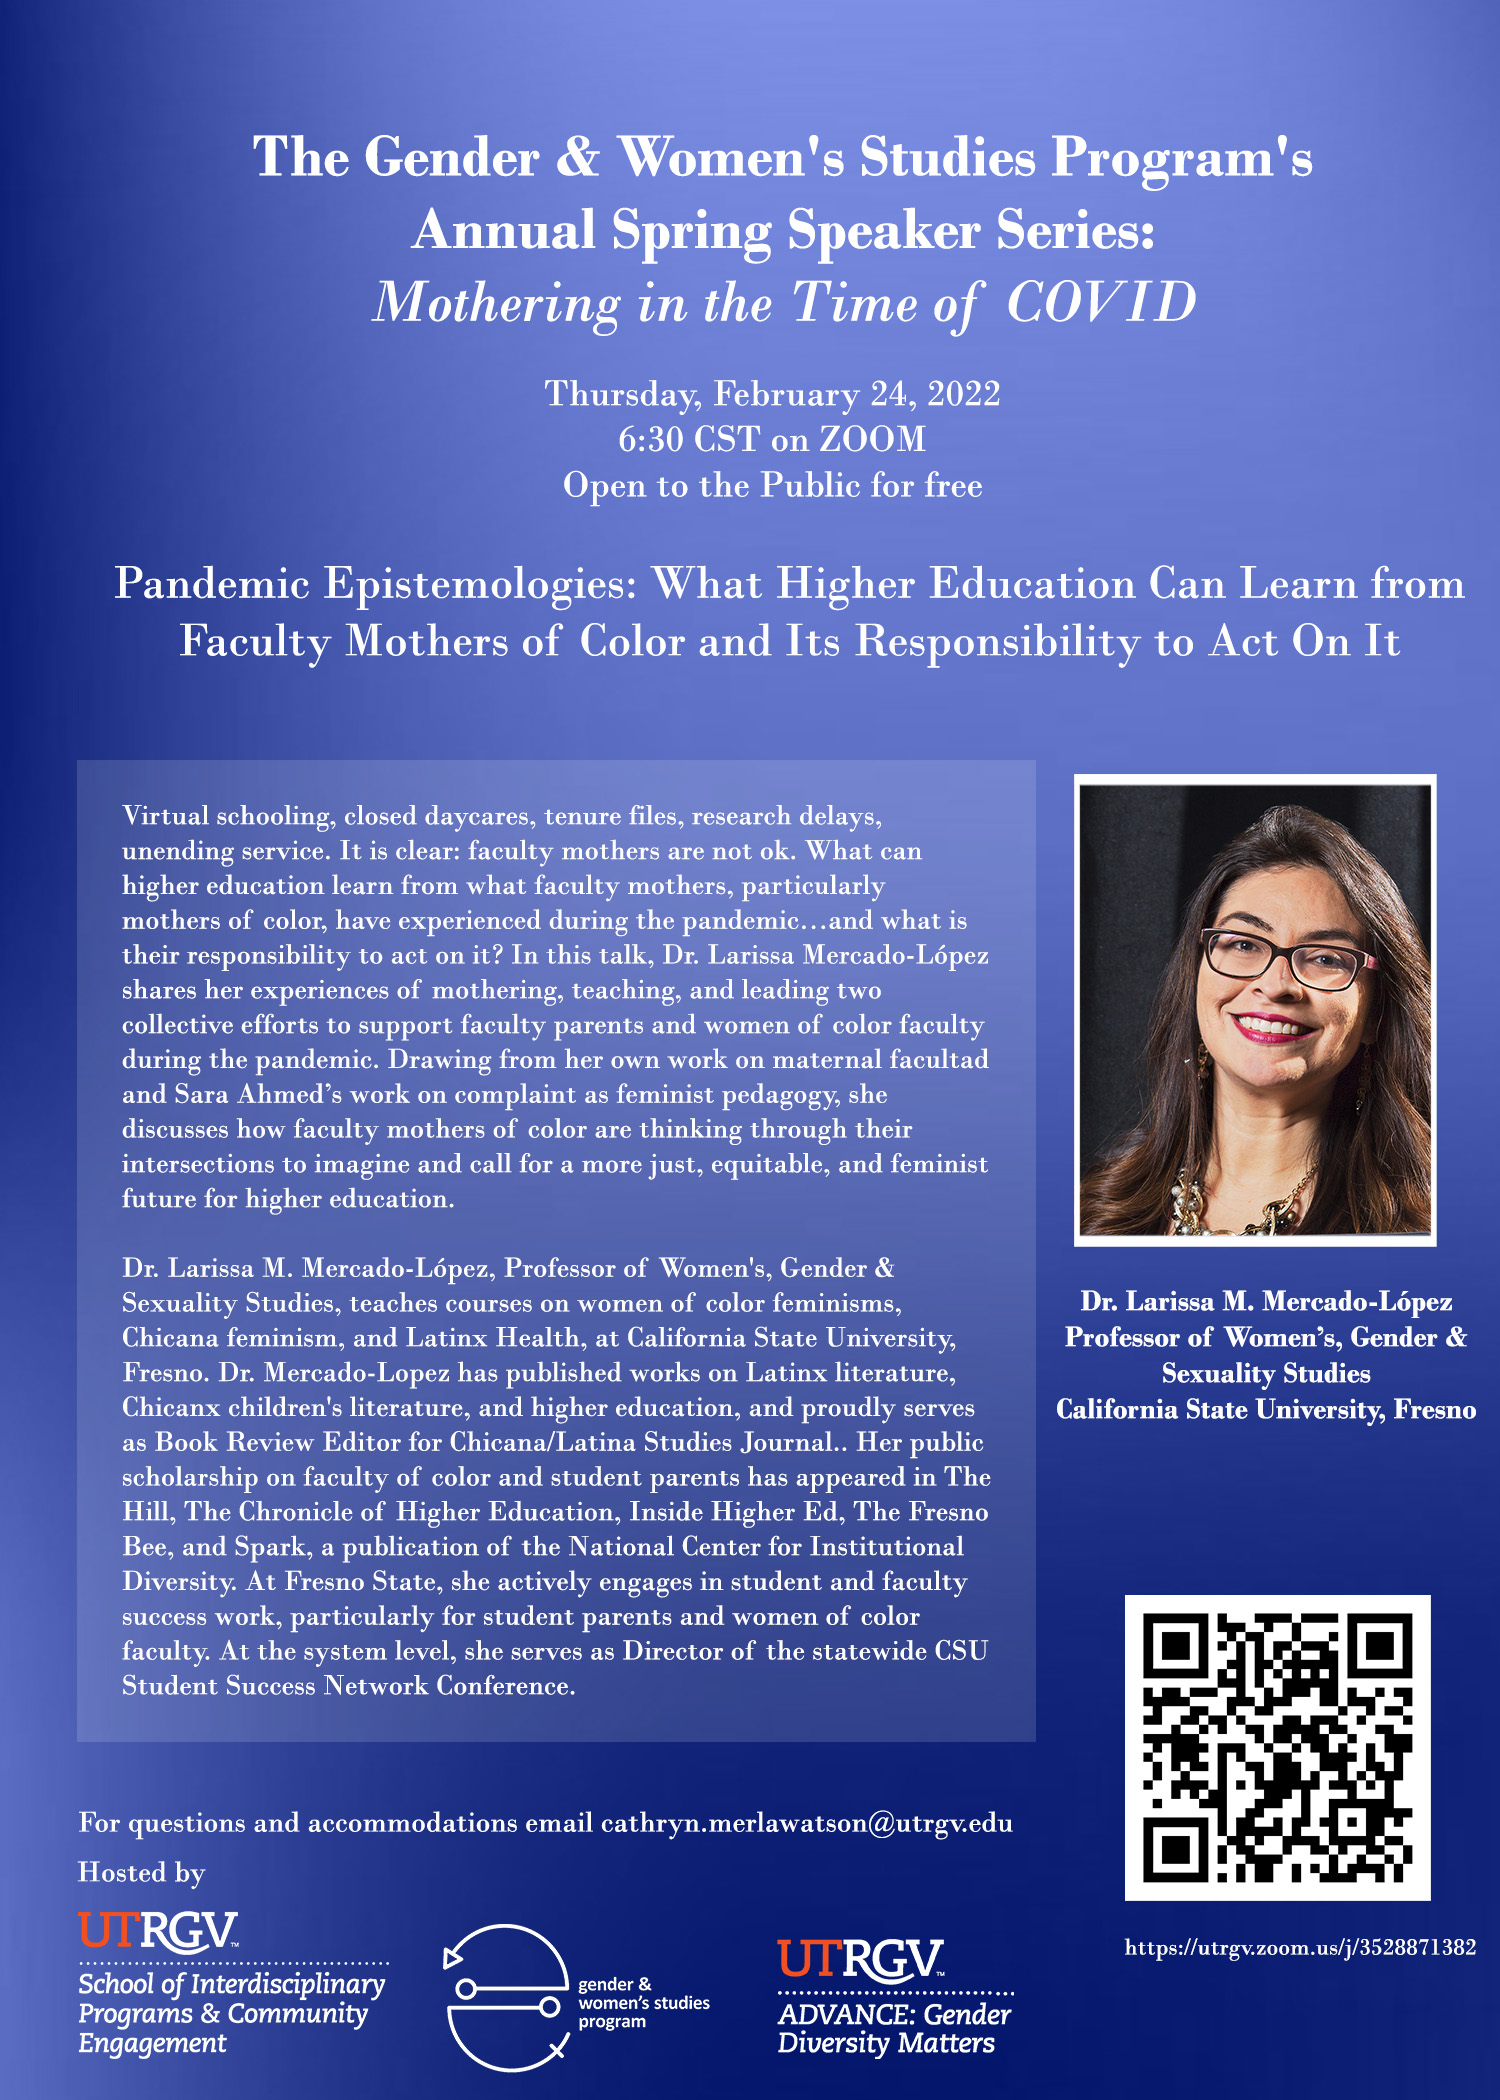 GWSP Spring Speaker Series: Mothering in the Time of COVID - Pandemic Epistemologies: What Higher Education Can Learn from Faculty Mothers of Color and Its Responsibility to Act On It